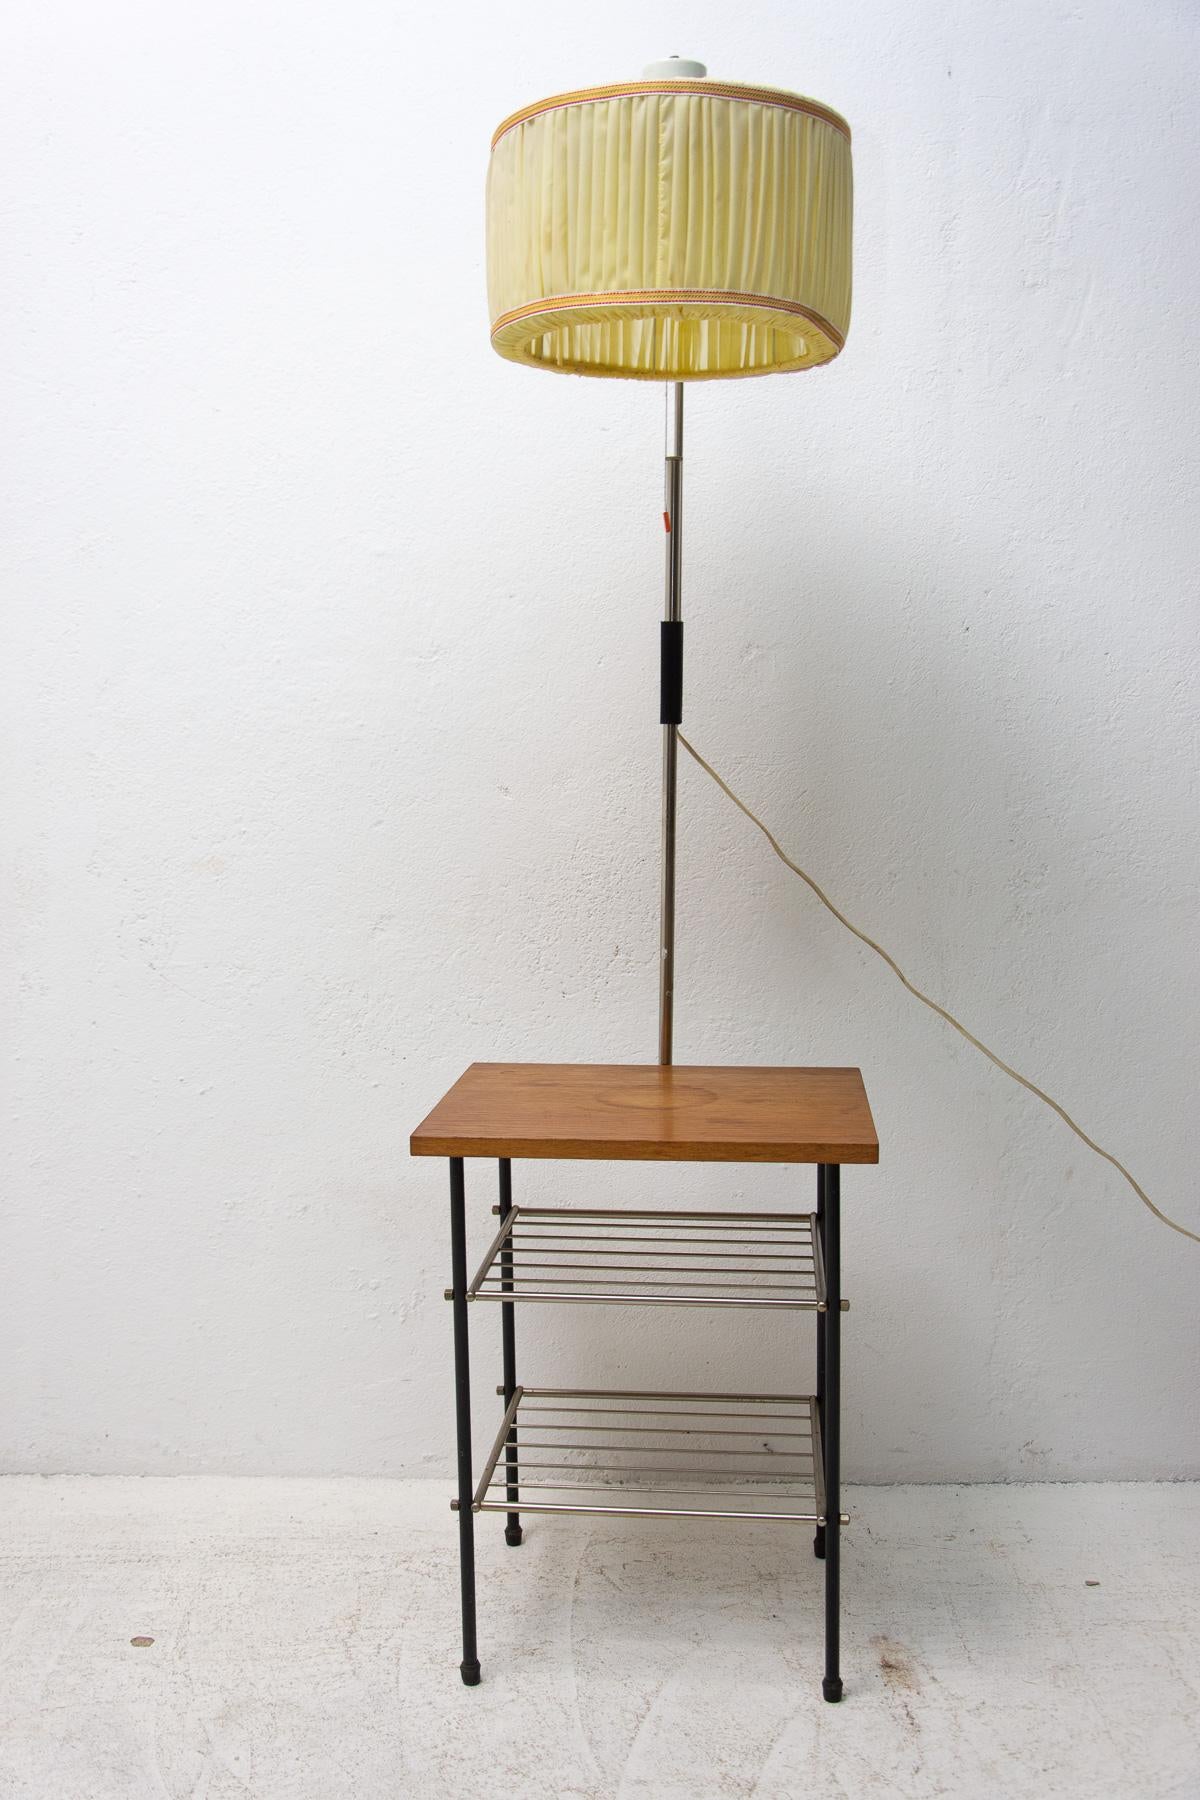 Vintage Floor Lamp with Storage Space, 70s, Czechoslovakia For Sale 8